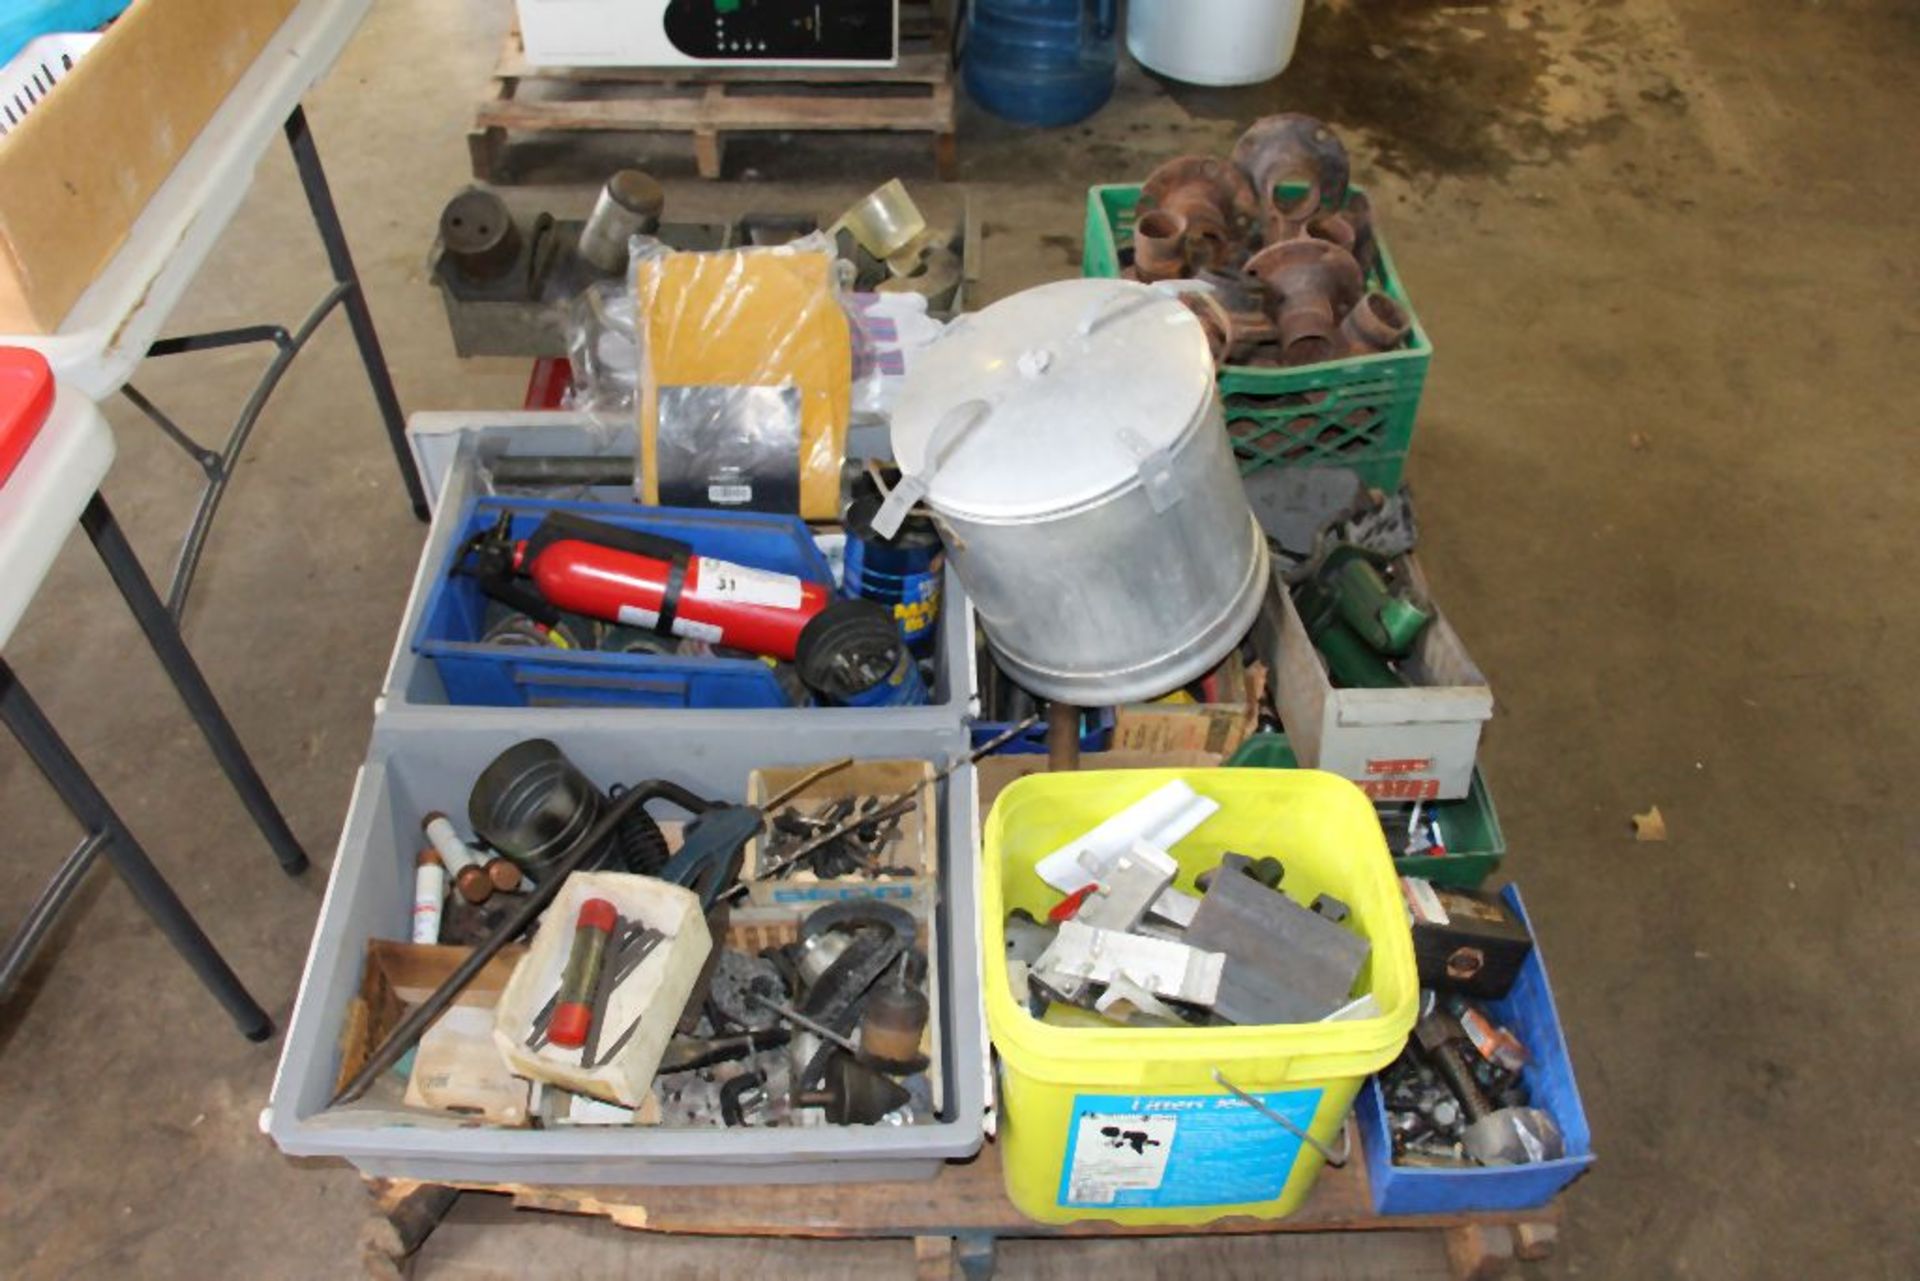 palette of assortment of grinding wheels, cutting tools, nuts, bolts, fuses, and misc.